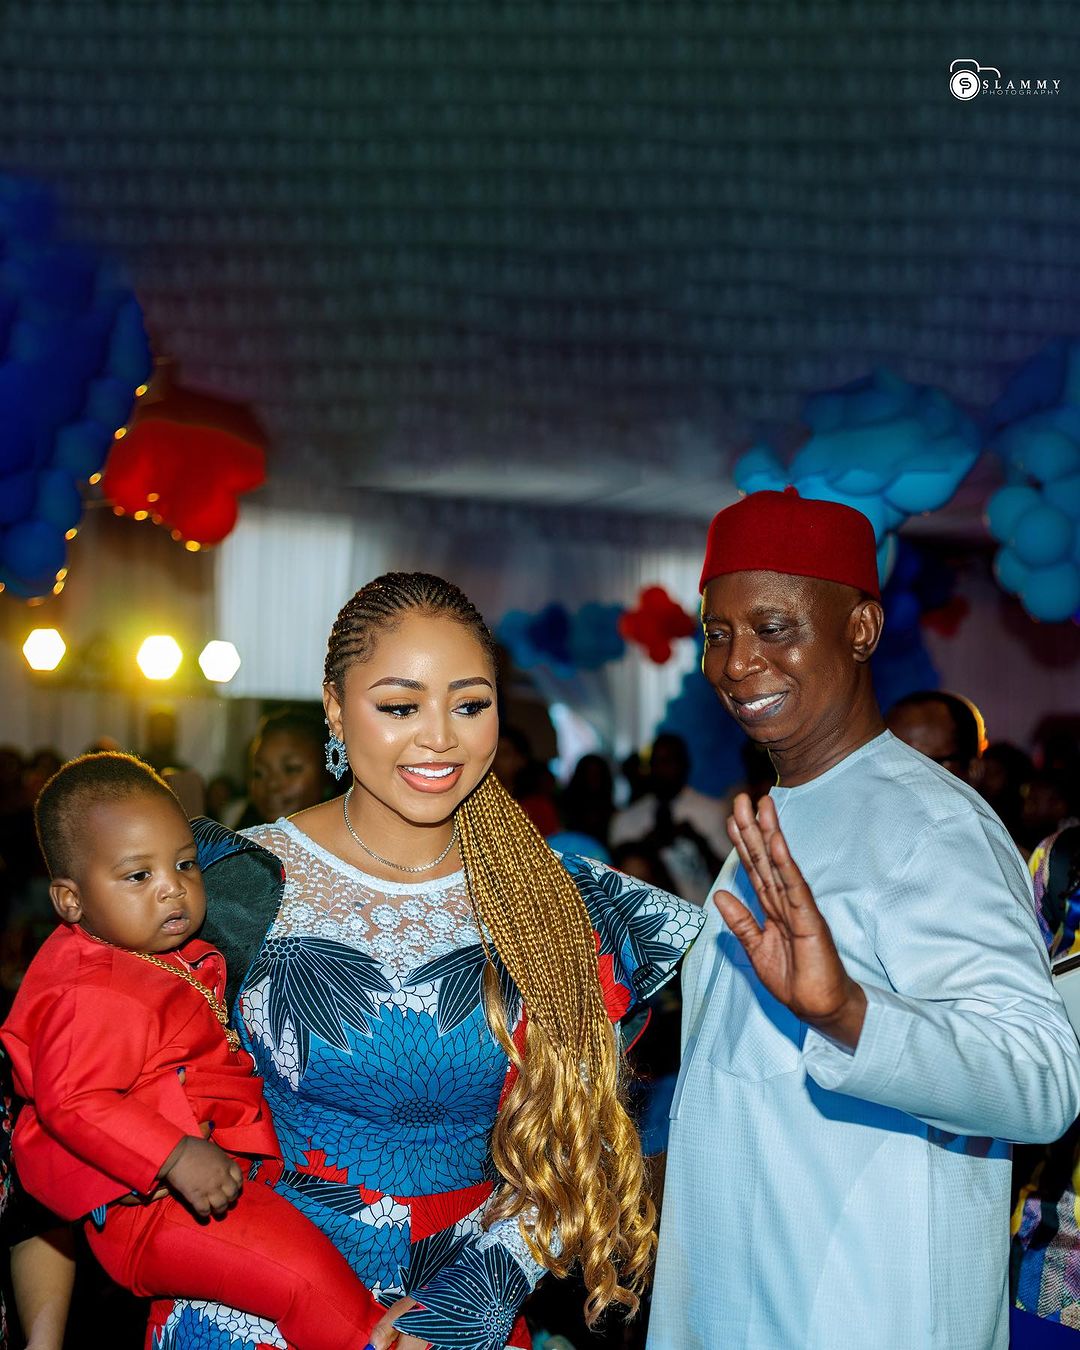 Regina Daniels celebrates her sons as they both turn 3 and 1 (Photos)